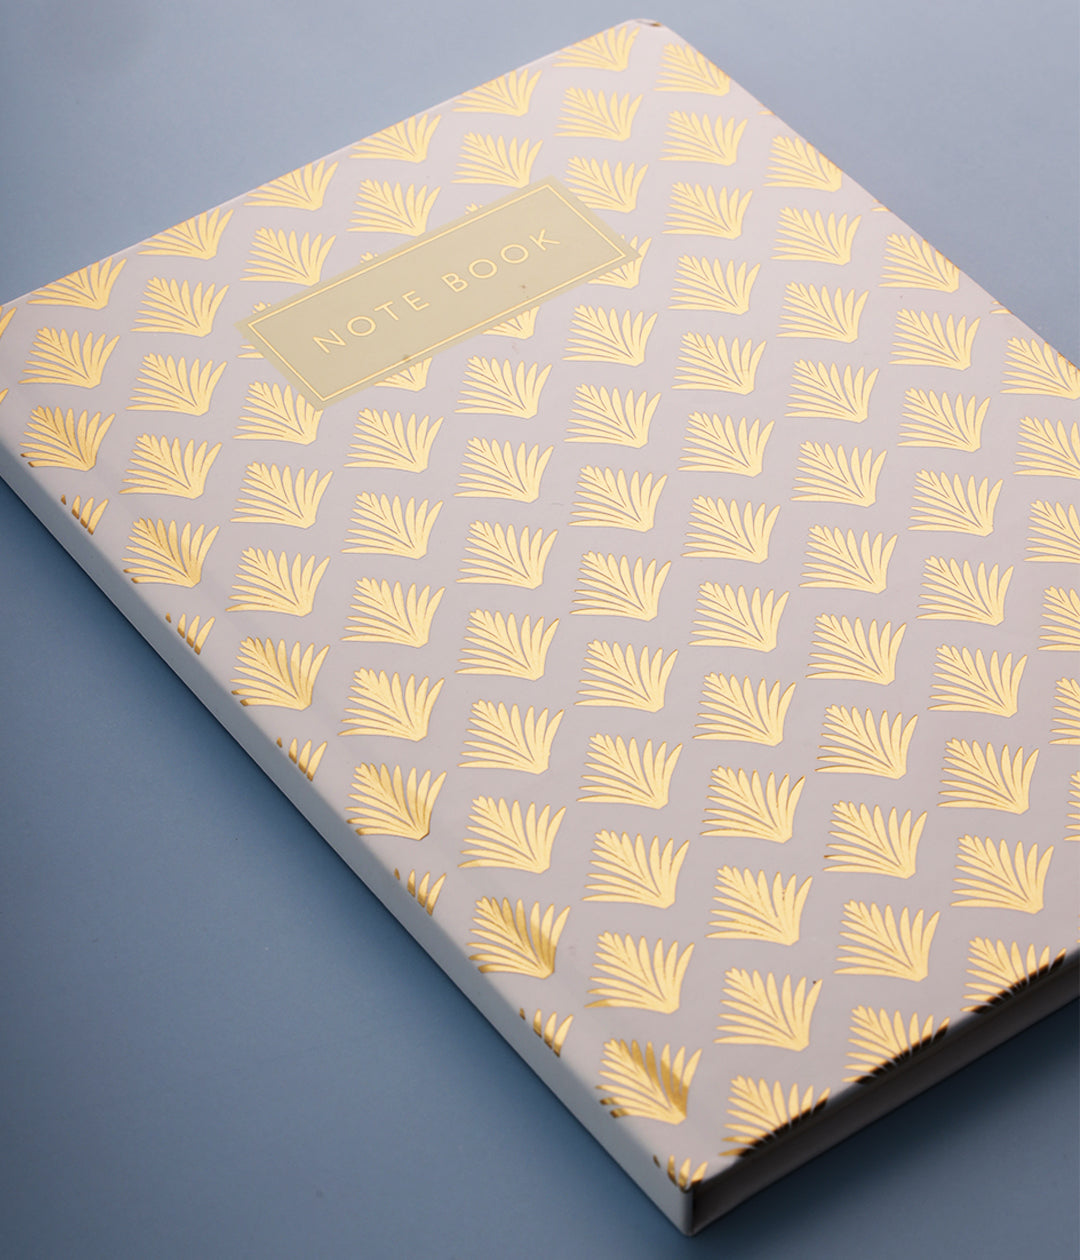 The Golden Fall Hardbound Notebook Journal Diary with Gold Foil Accents